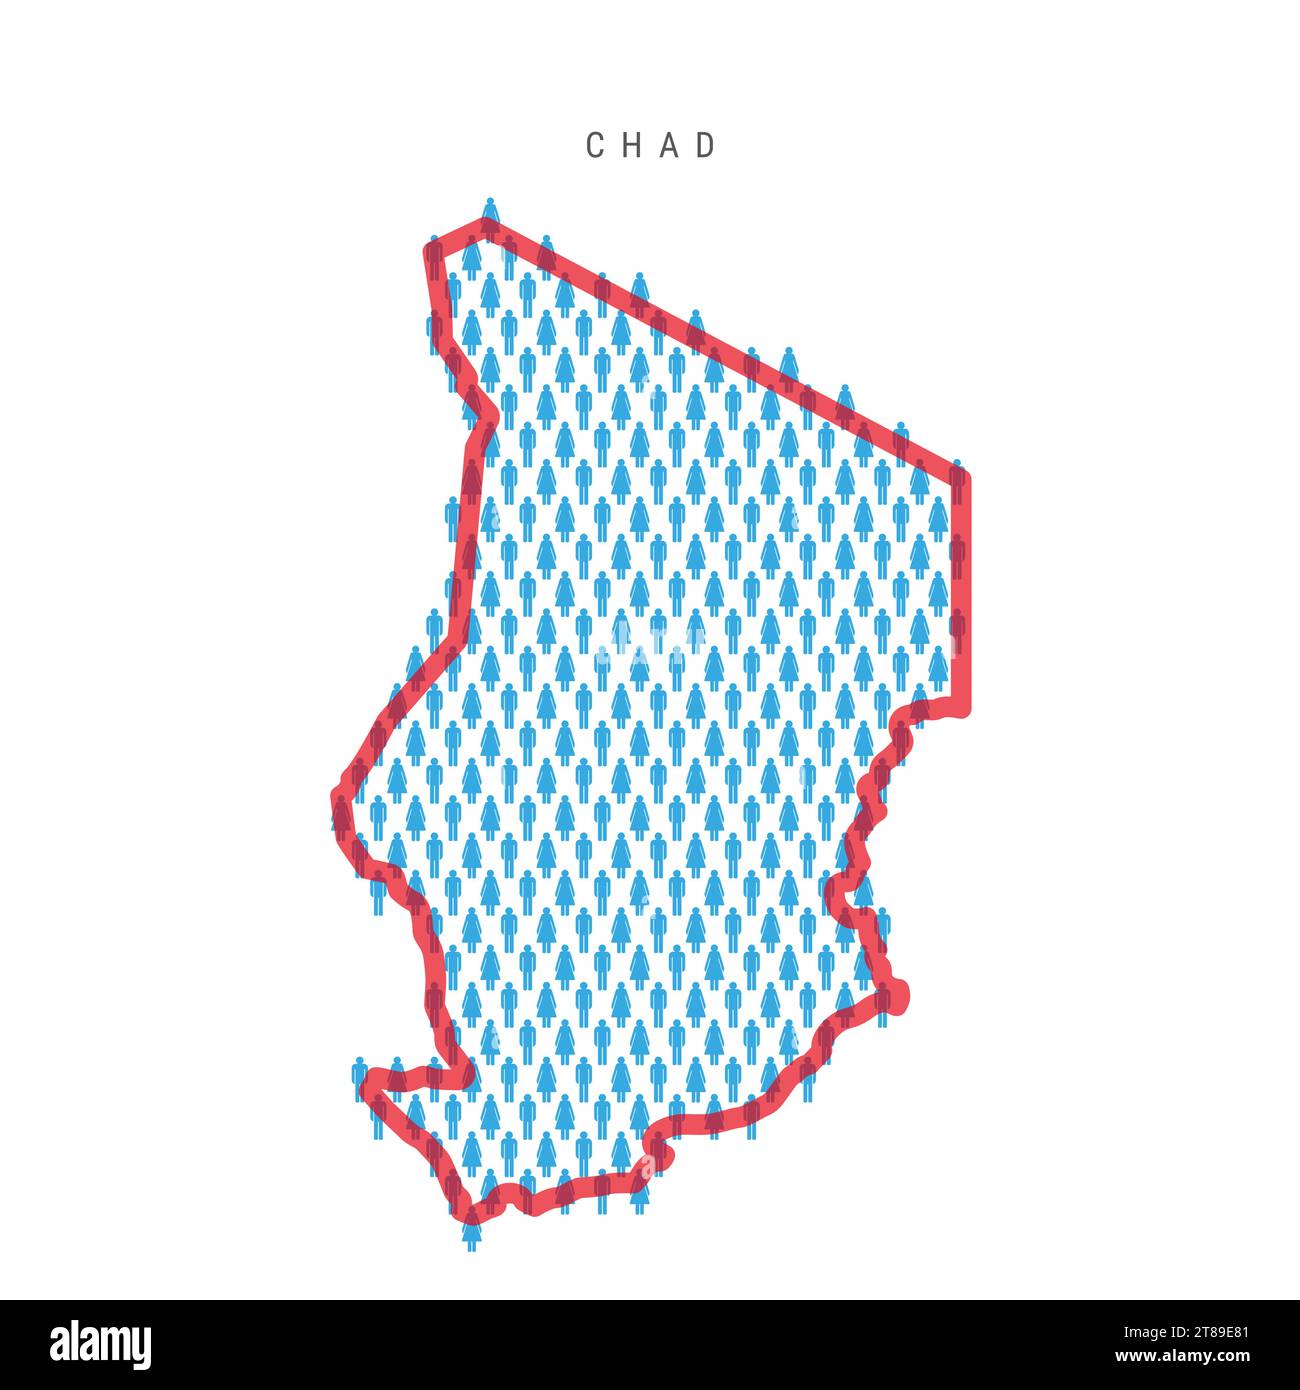 Chad population map. Stick figures Chadian people map with bold red translucent country border. Pattern of men and women icons. Isolated vector illust Stock Vector